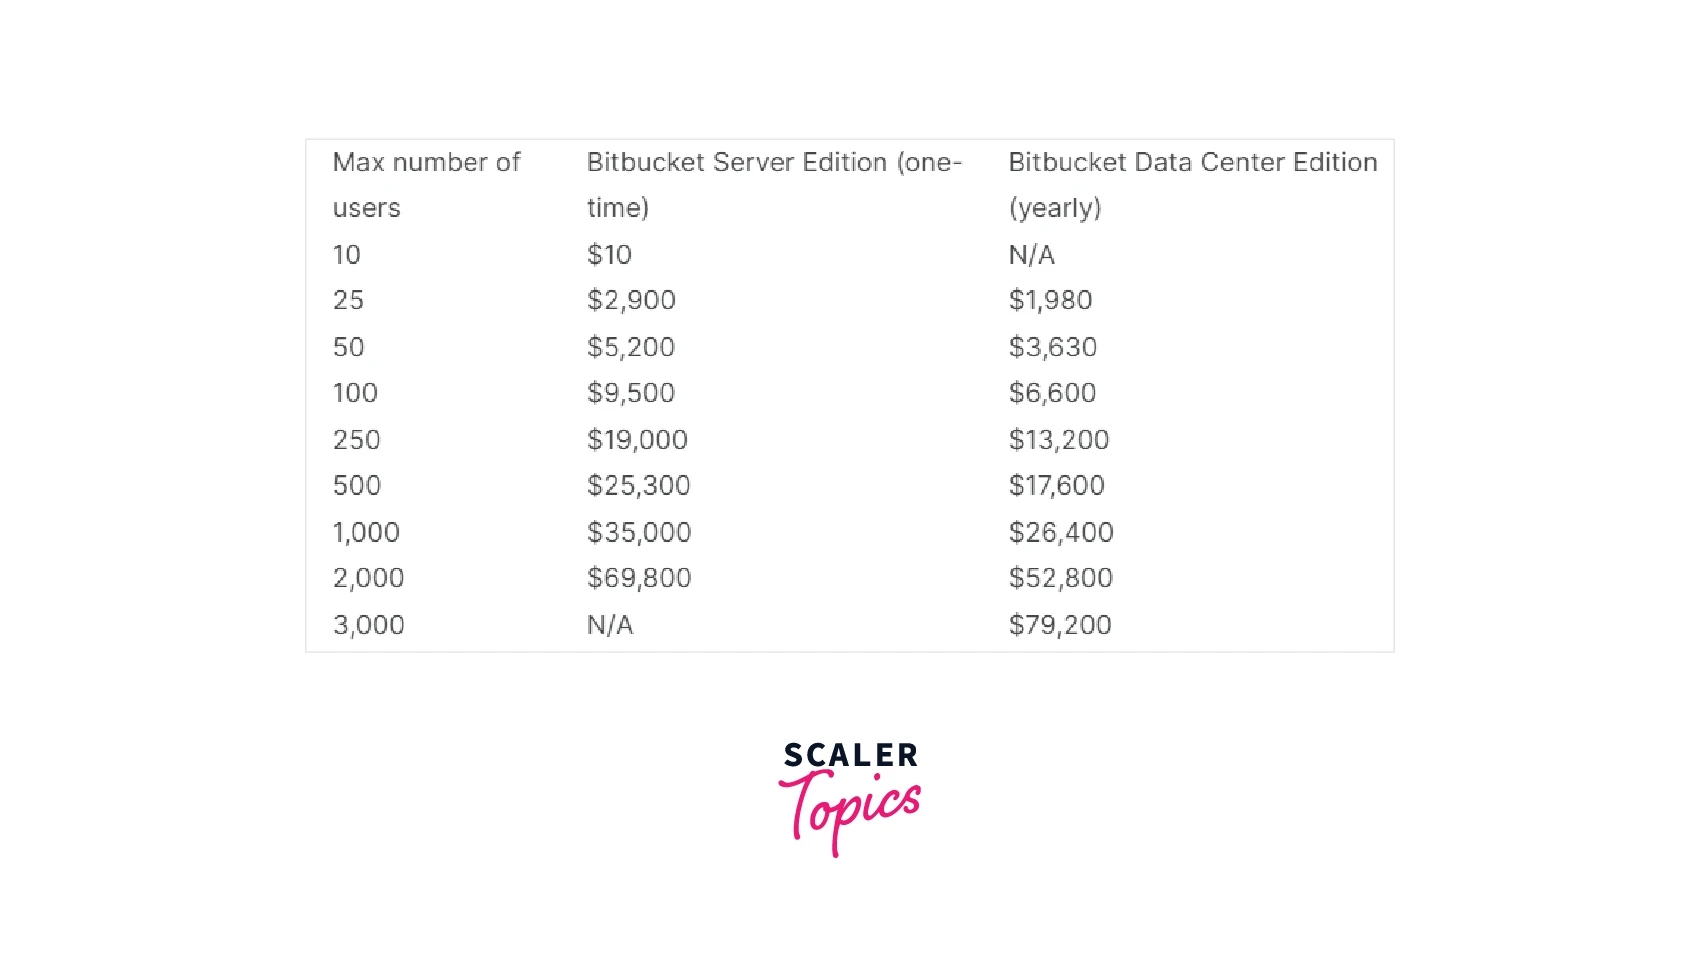 Self-Hosted Edition pricing